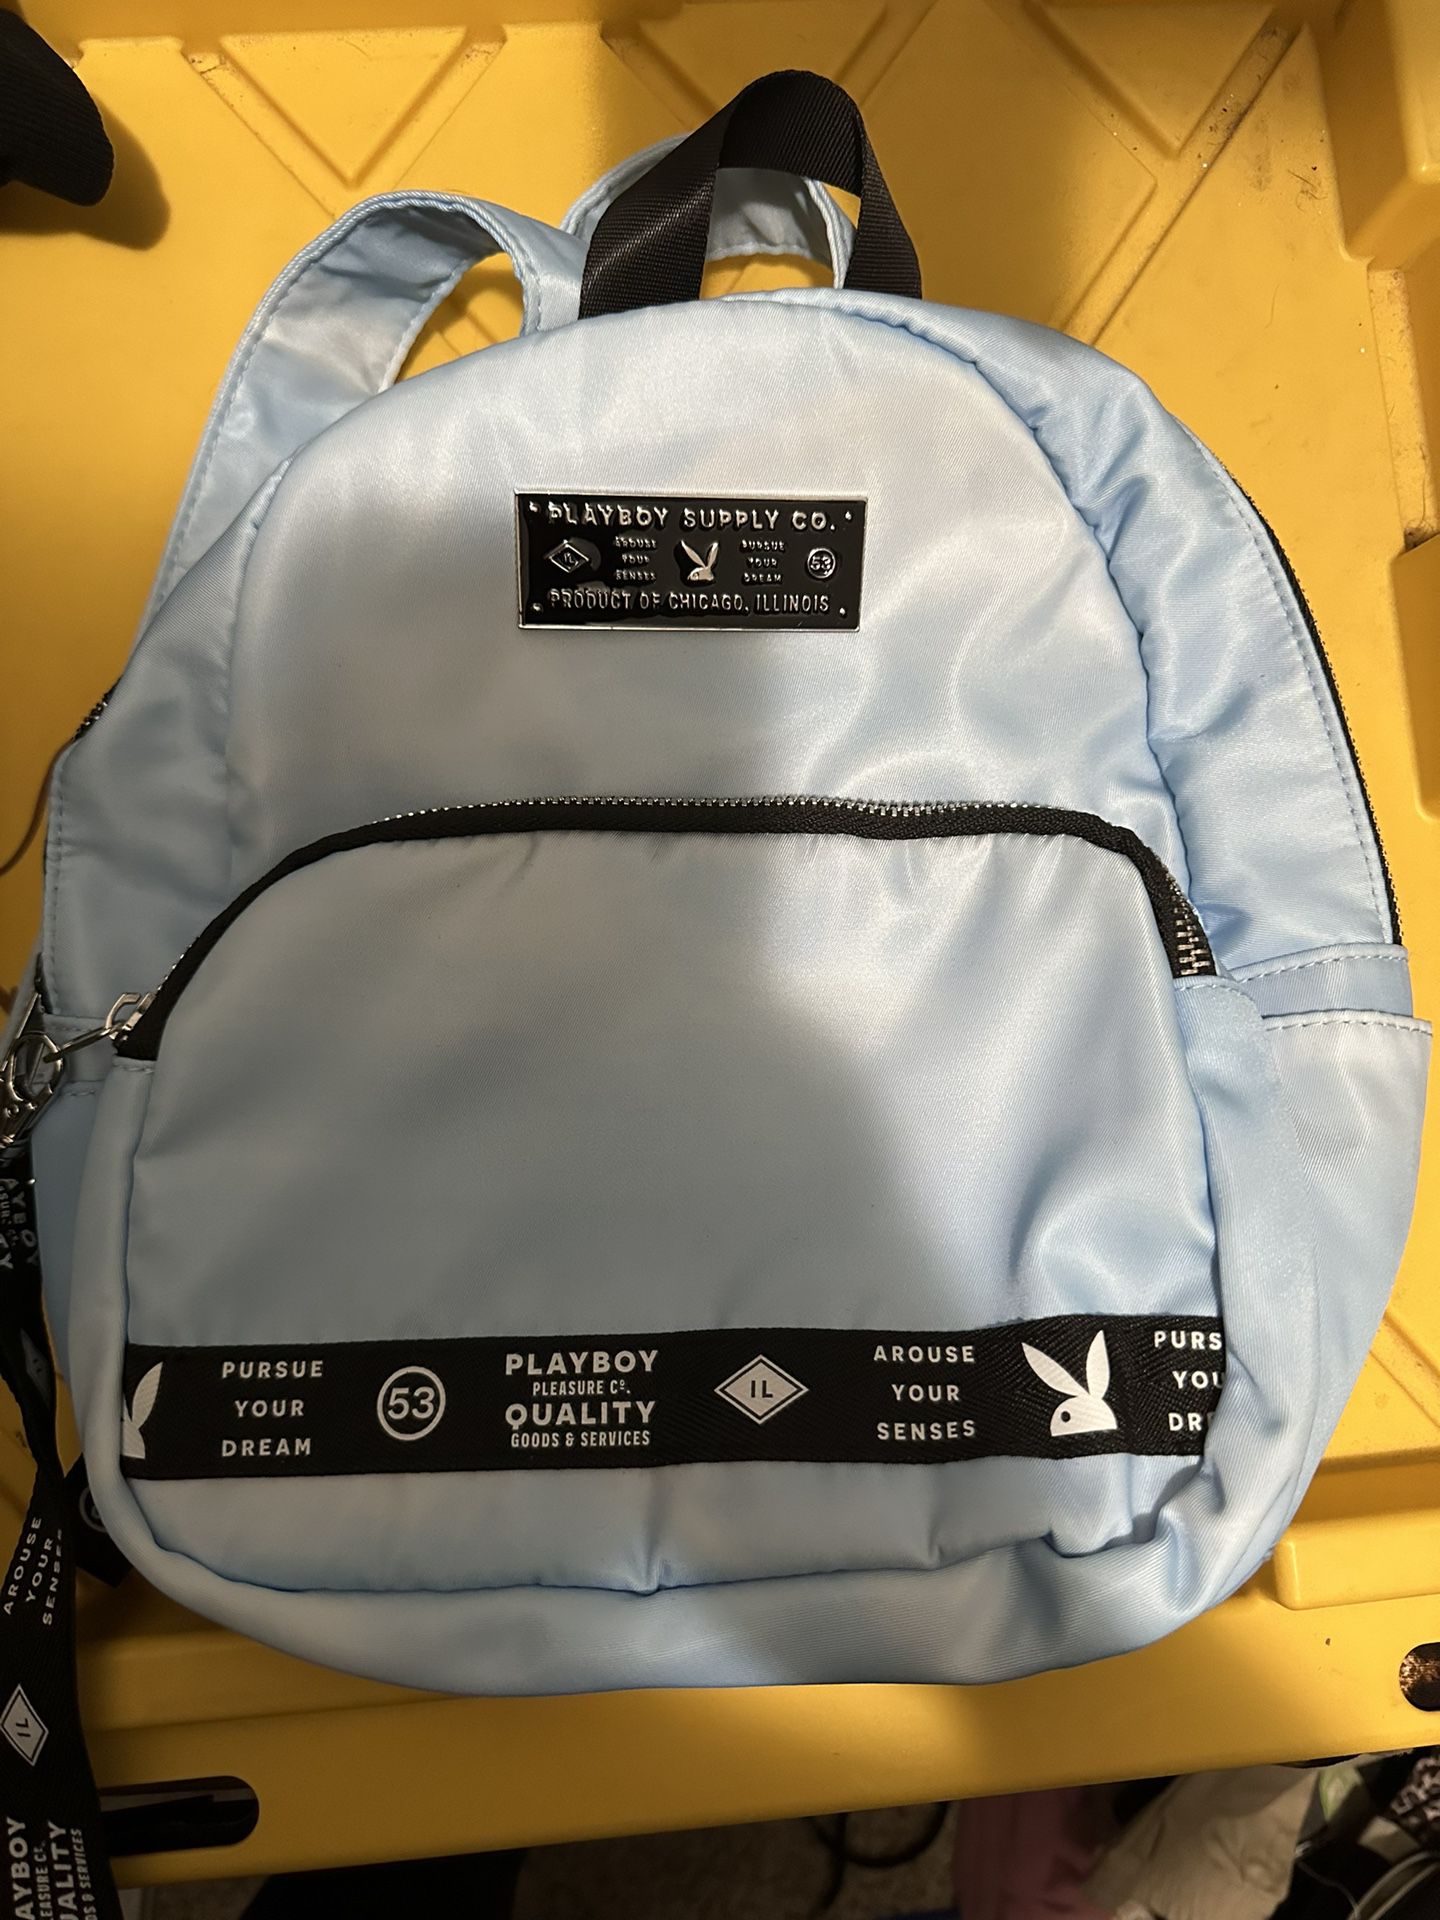 Checkered Mini Backpack for Sale in Oxnard, CA - OfferUp